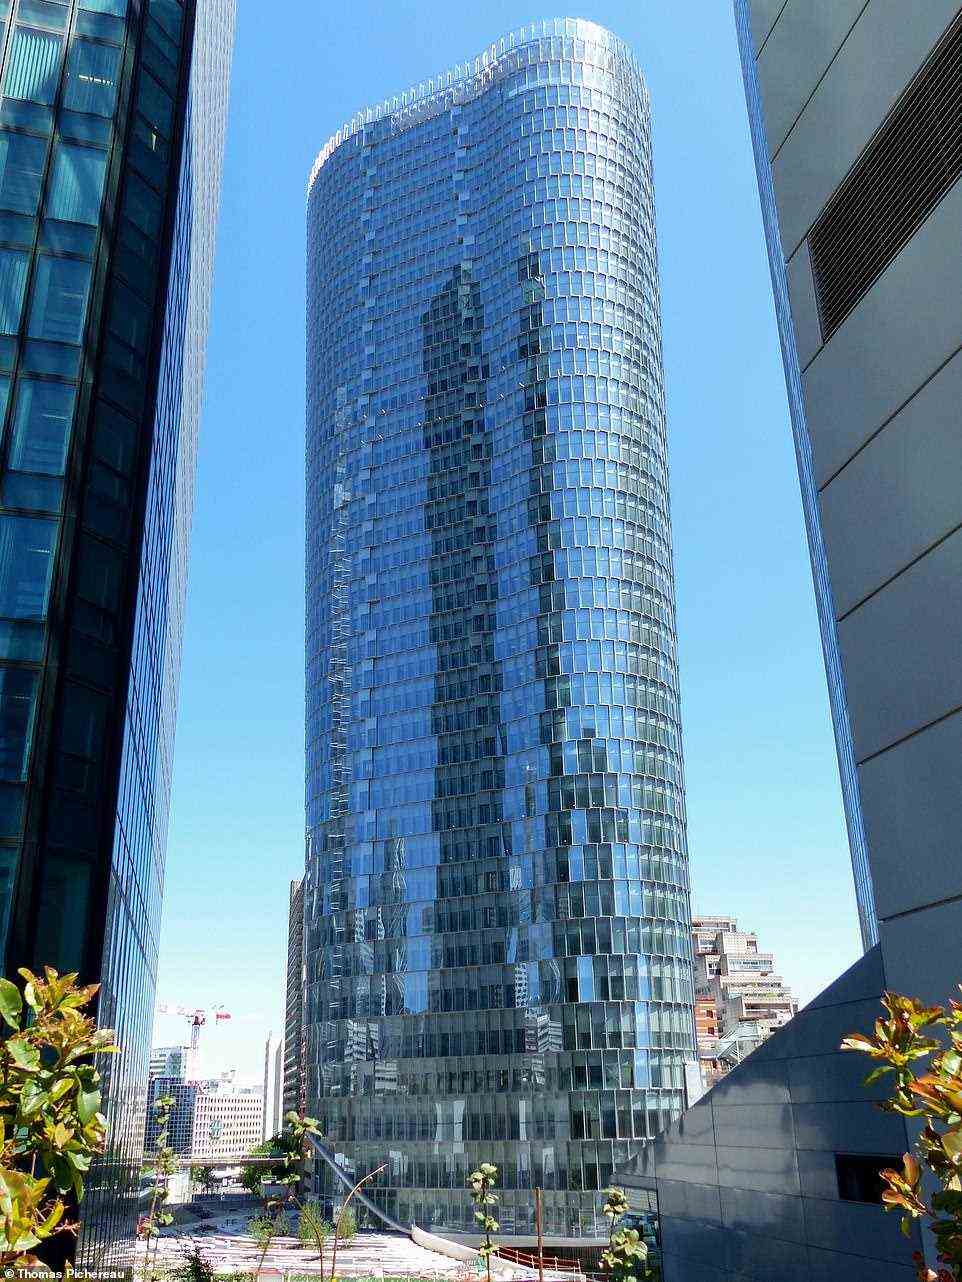 Pictured is Tour Alto in Courbevoie in the metropolitan area of Paris, which ranks sixth and was conceived by IF Architects and SRA Architectes. Sweeping into the sky, the building is 38 storeys tall and 160 metres (525ft) in height. It features 3,800 glass blocks on the facade, and there is a ventilated double facade made up of a second layer of glass. The unconventional design sees the floor area widen as you ascend the building, increasing from 700 metres squared at the base to 1,500 metres squared at the top